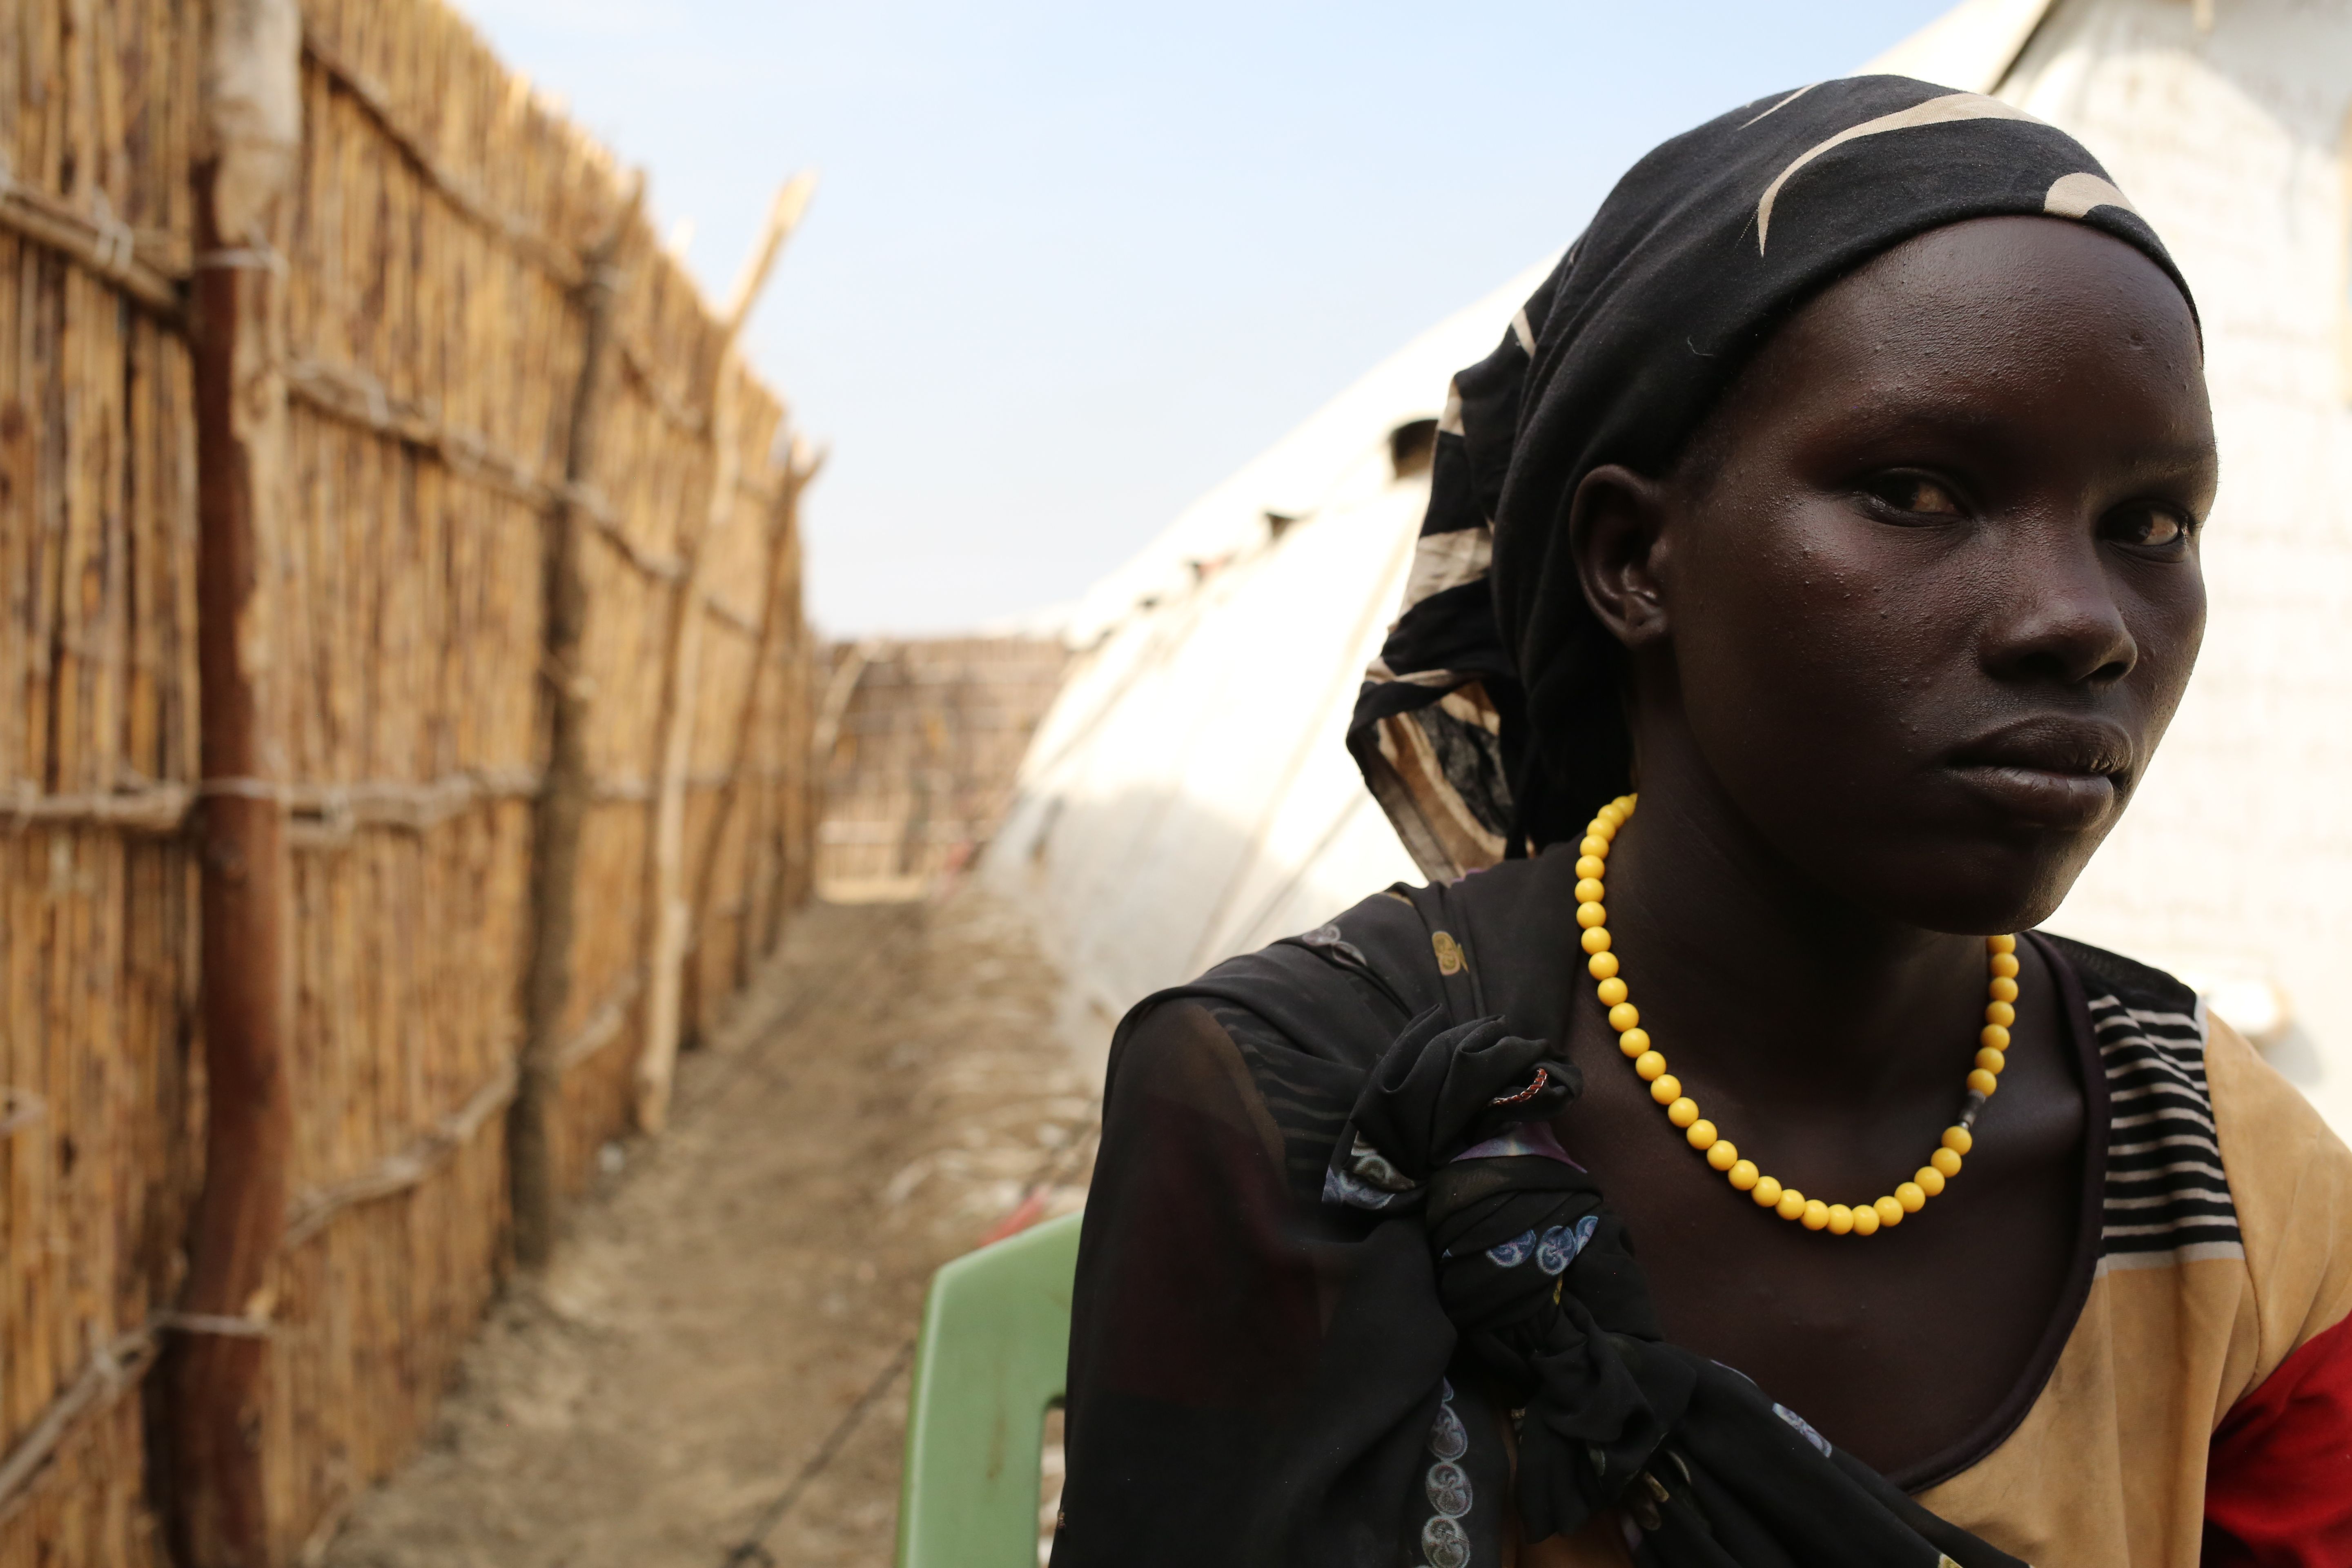 A woman named Elizabeth at the U.N. base in Bentiu, South Sudan. She fled recent fighting in Leer County. Image by Cassandra Vinograd. South Sudan, 2016.